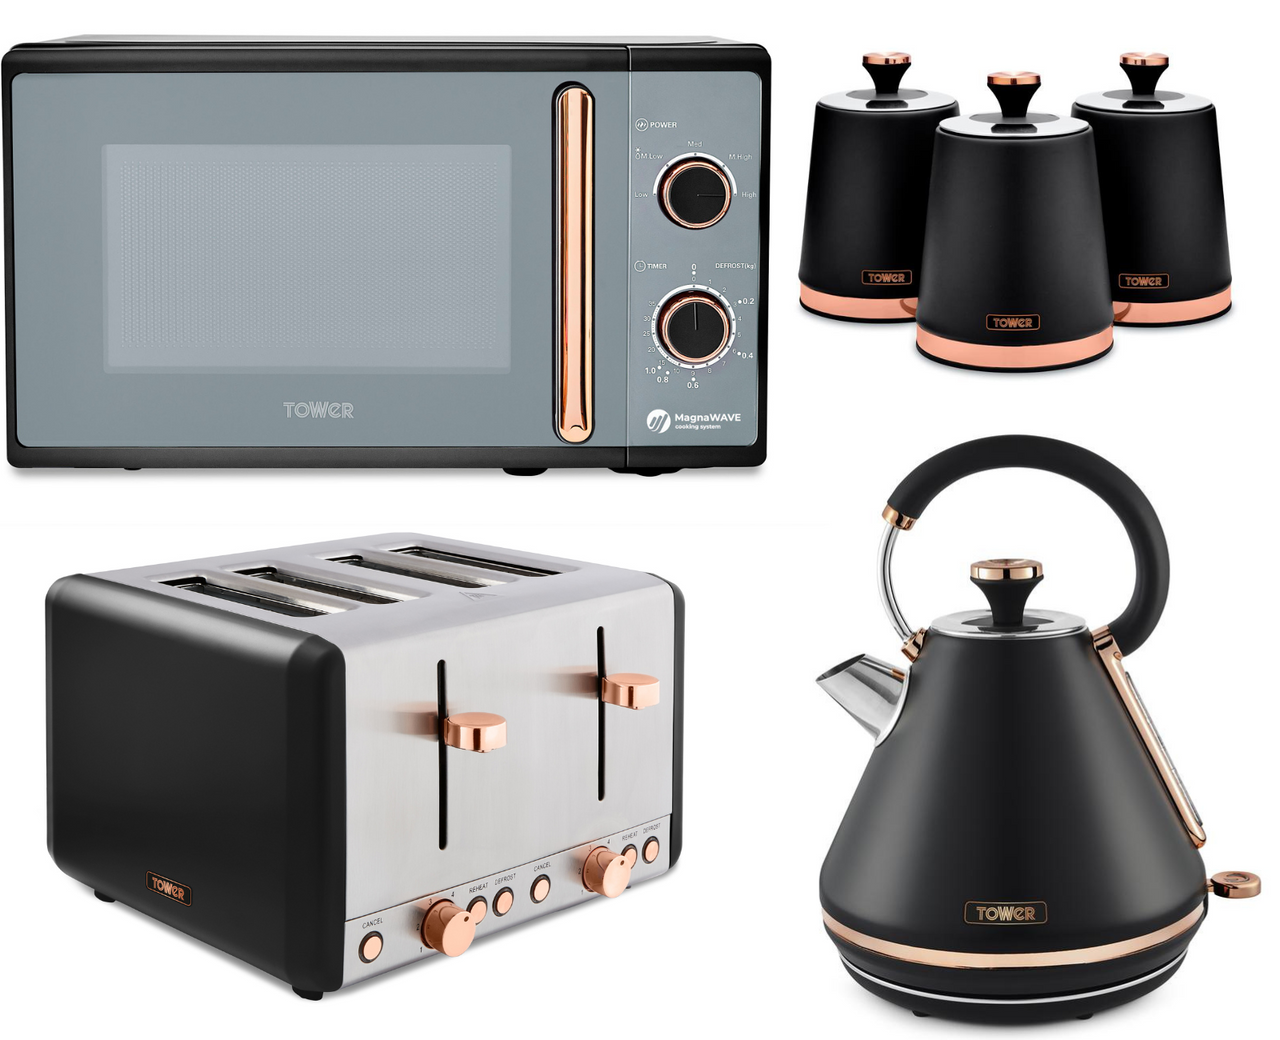 Tower Cavaletto Black Pyramid Kettle 4 Slice Toaster Microwave & 3 Canisters Set